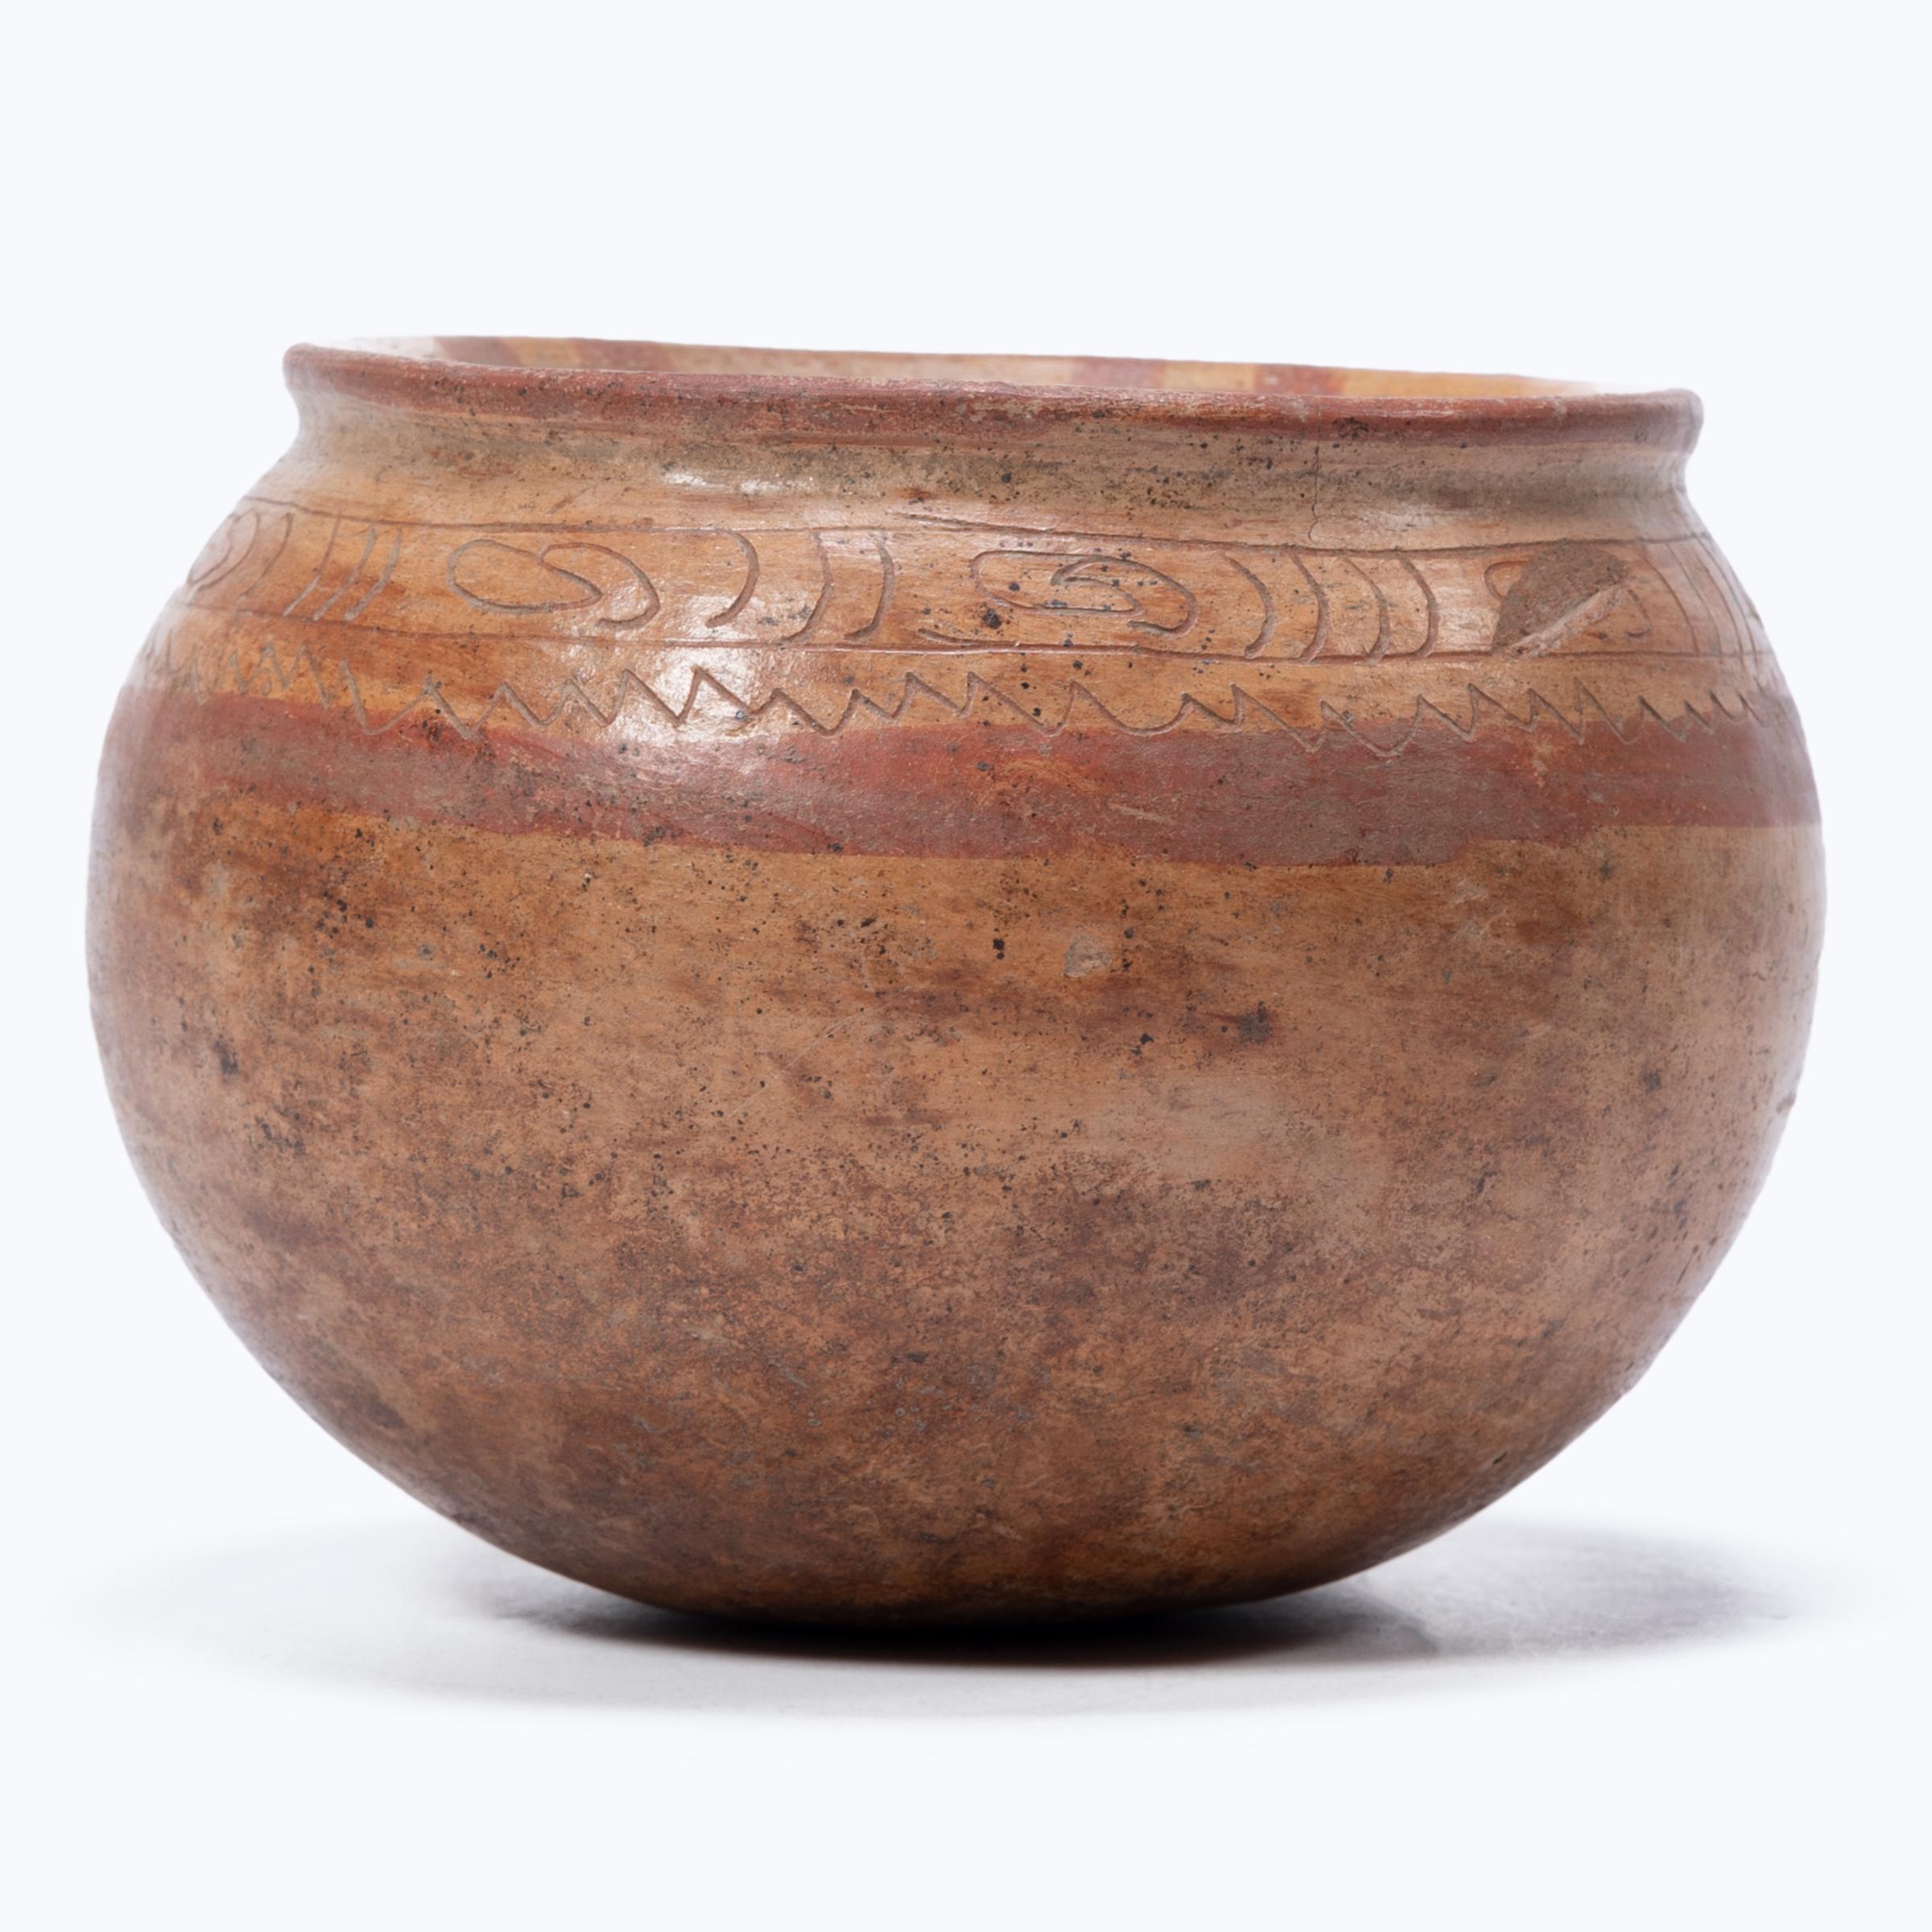 With a worn, glossy finish, this round orangeware bowl is a wonderful example of Pre-Columbian pottery. The delicate bowl has a flared lip banded by incised geometric patterns and painted red clay slip. Centuries of use have speckled the vessel with